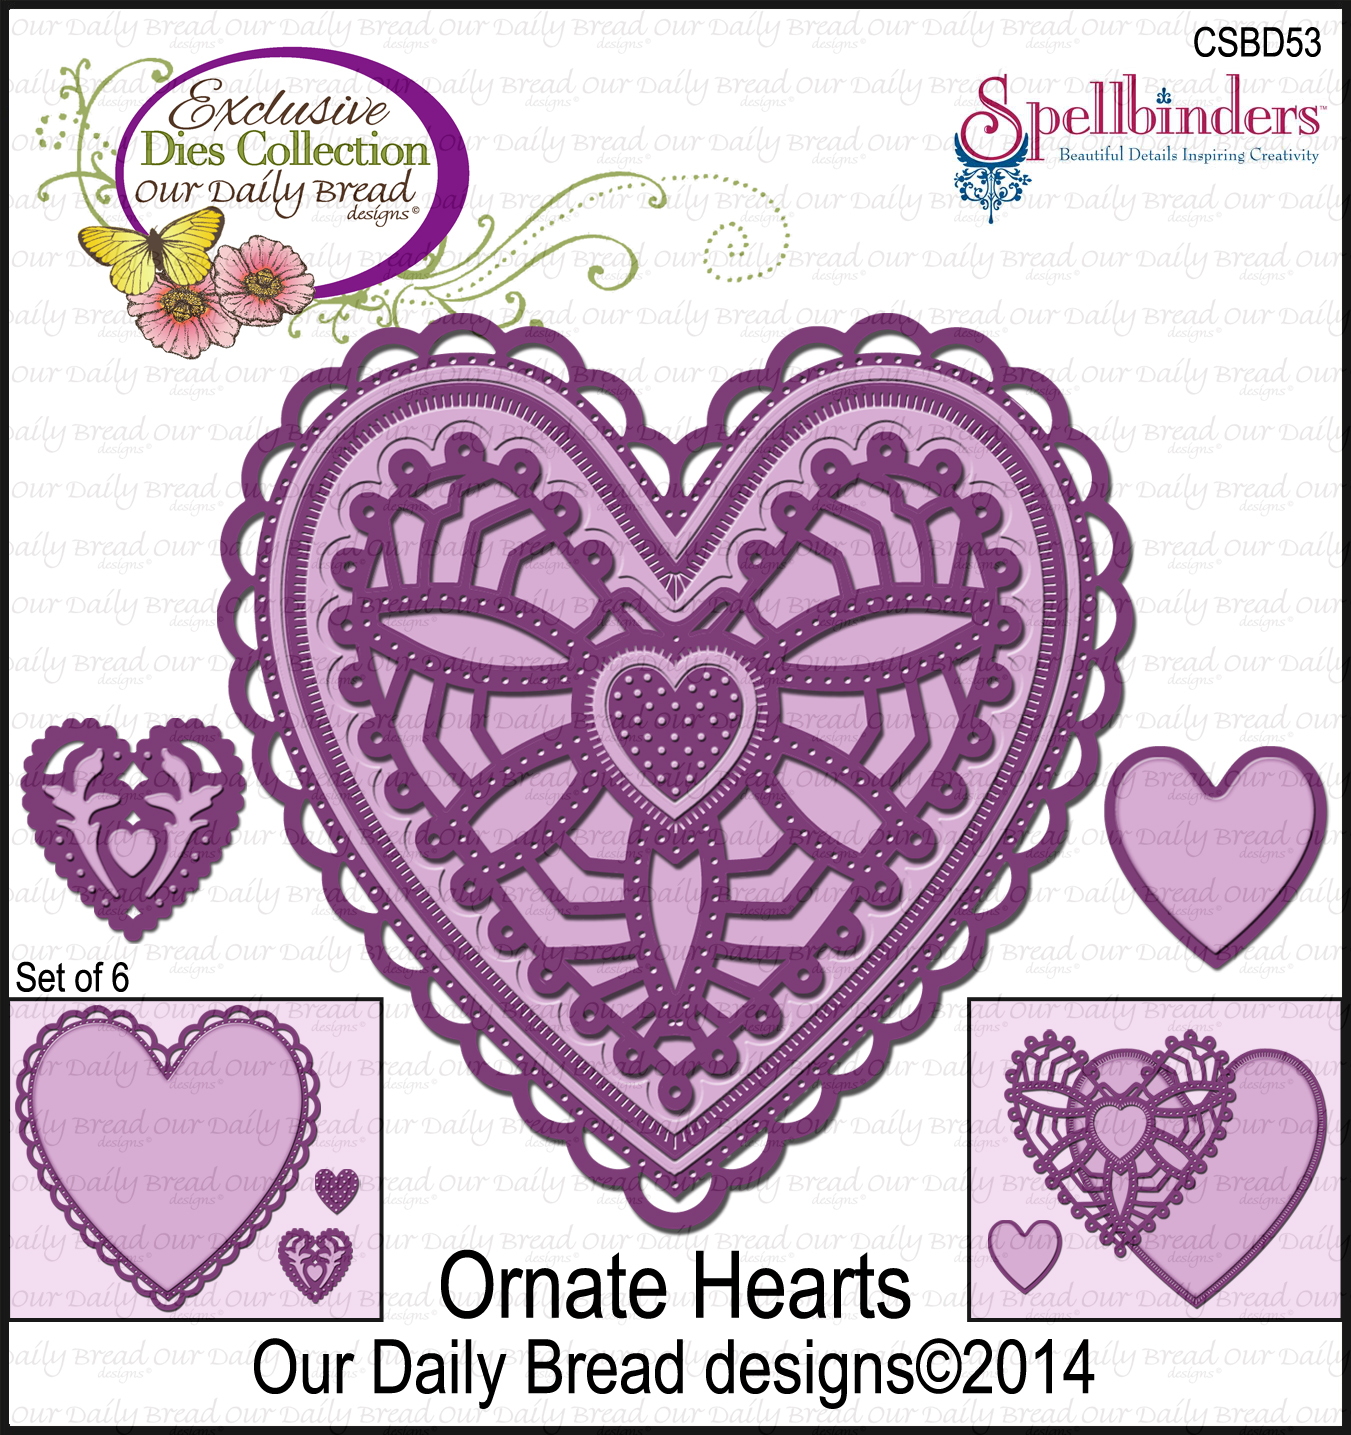 http://www.ourdailybreaddesigns.com/index.php/csbd53-ornate-hearts-dies.html